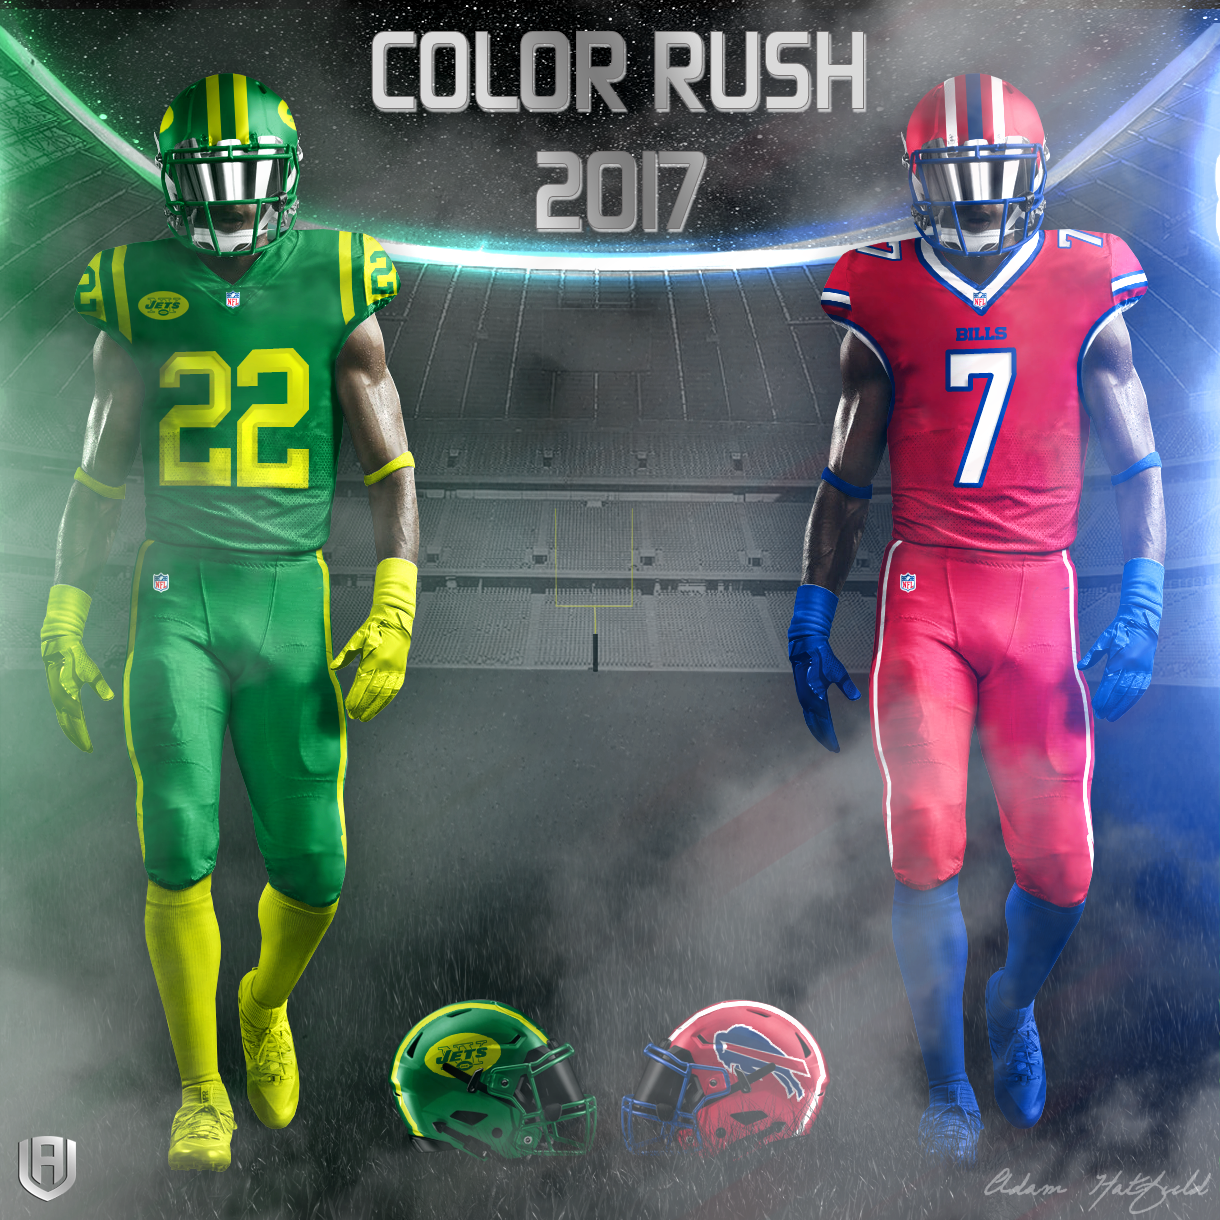 Design Adam S Take On Nfl Color Rush 2017 Touchdown Europe Coloring Wallpapers Download Free Images Wallpaper [coloring436.blogspot.com]